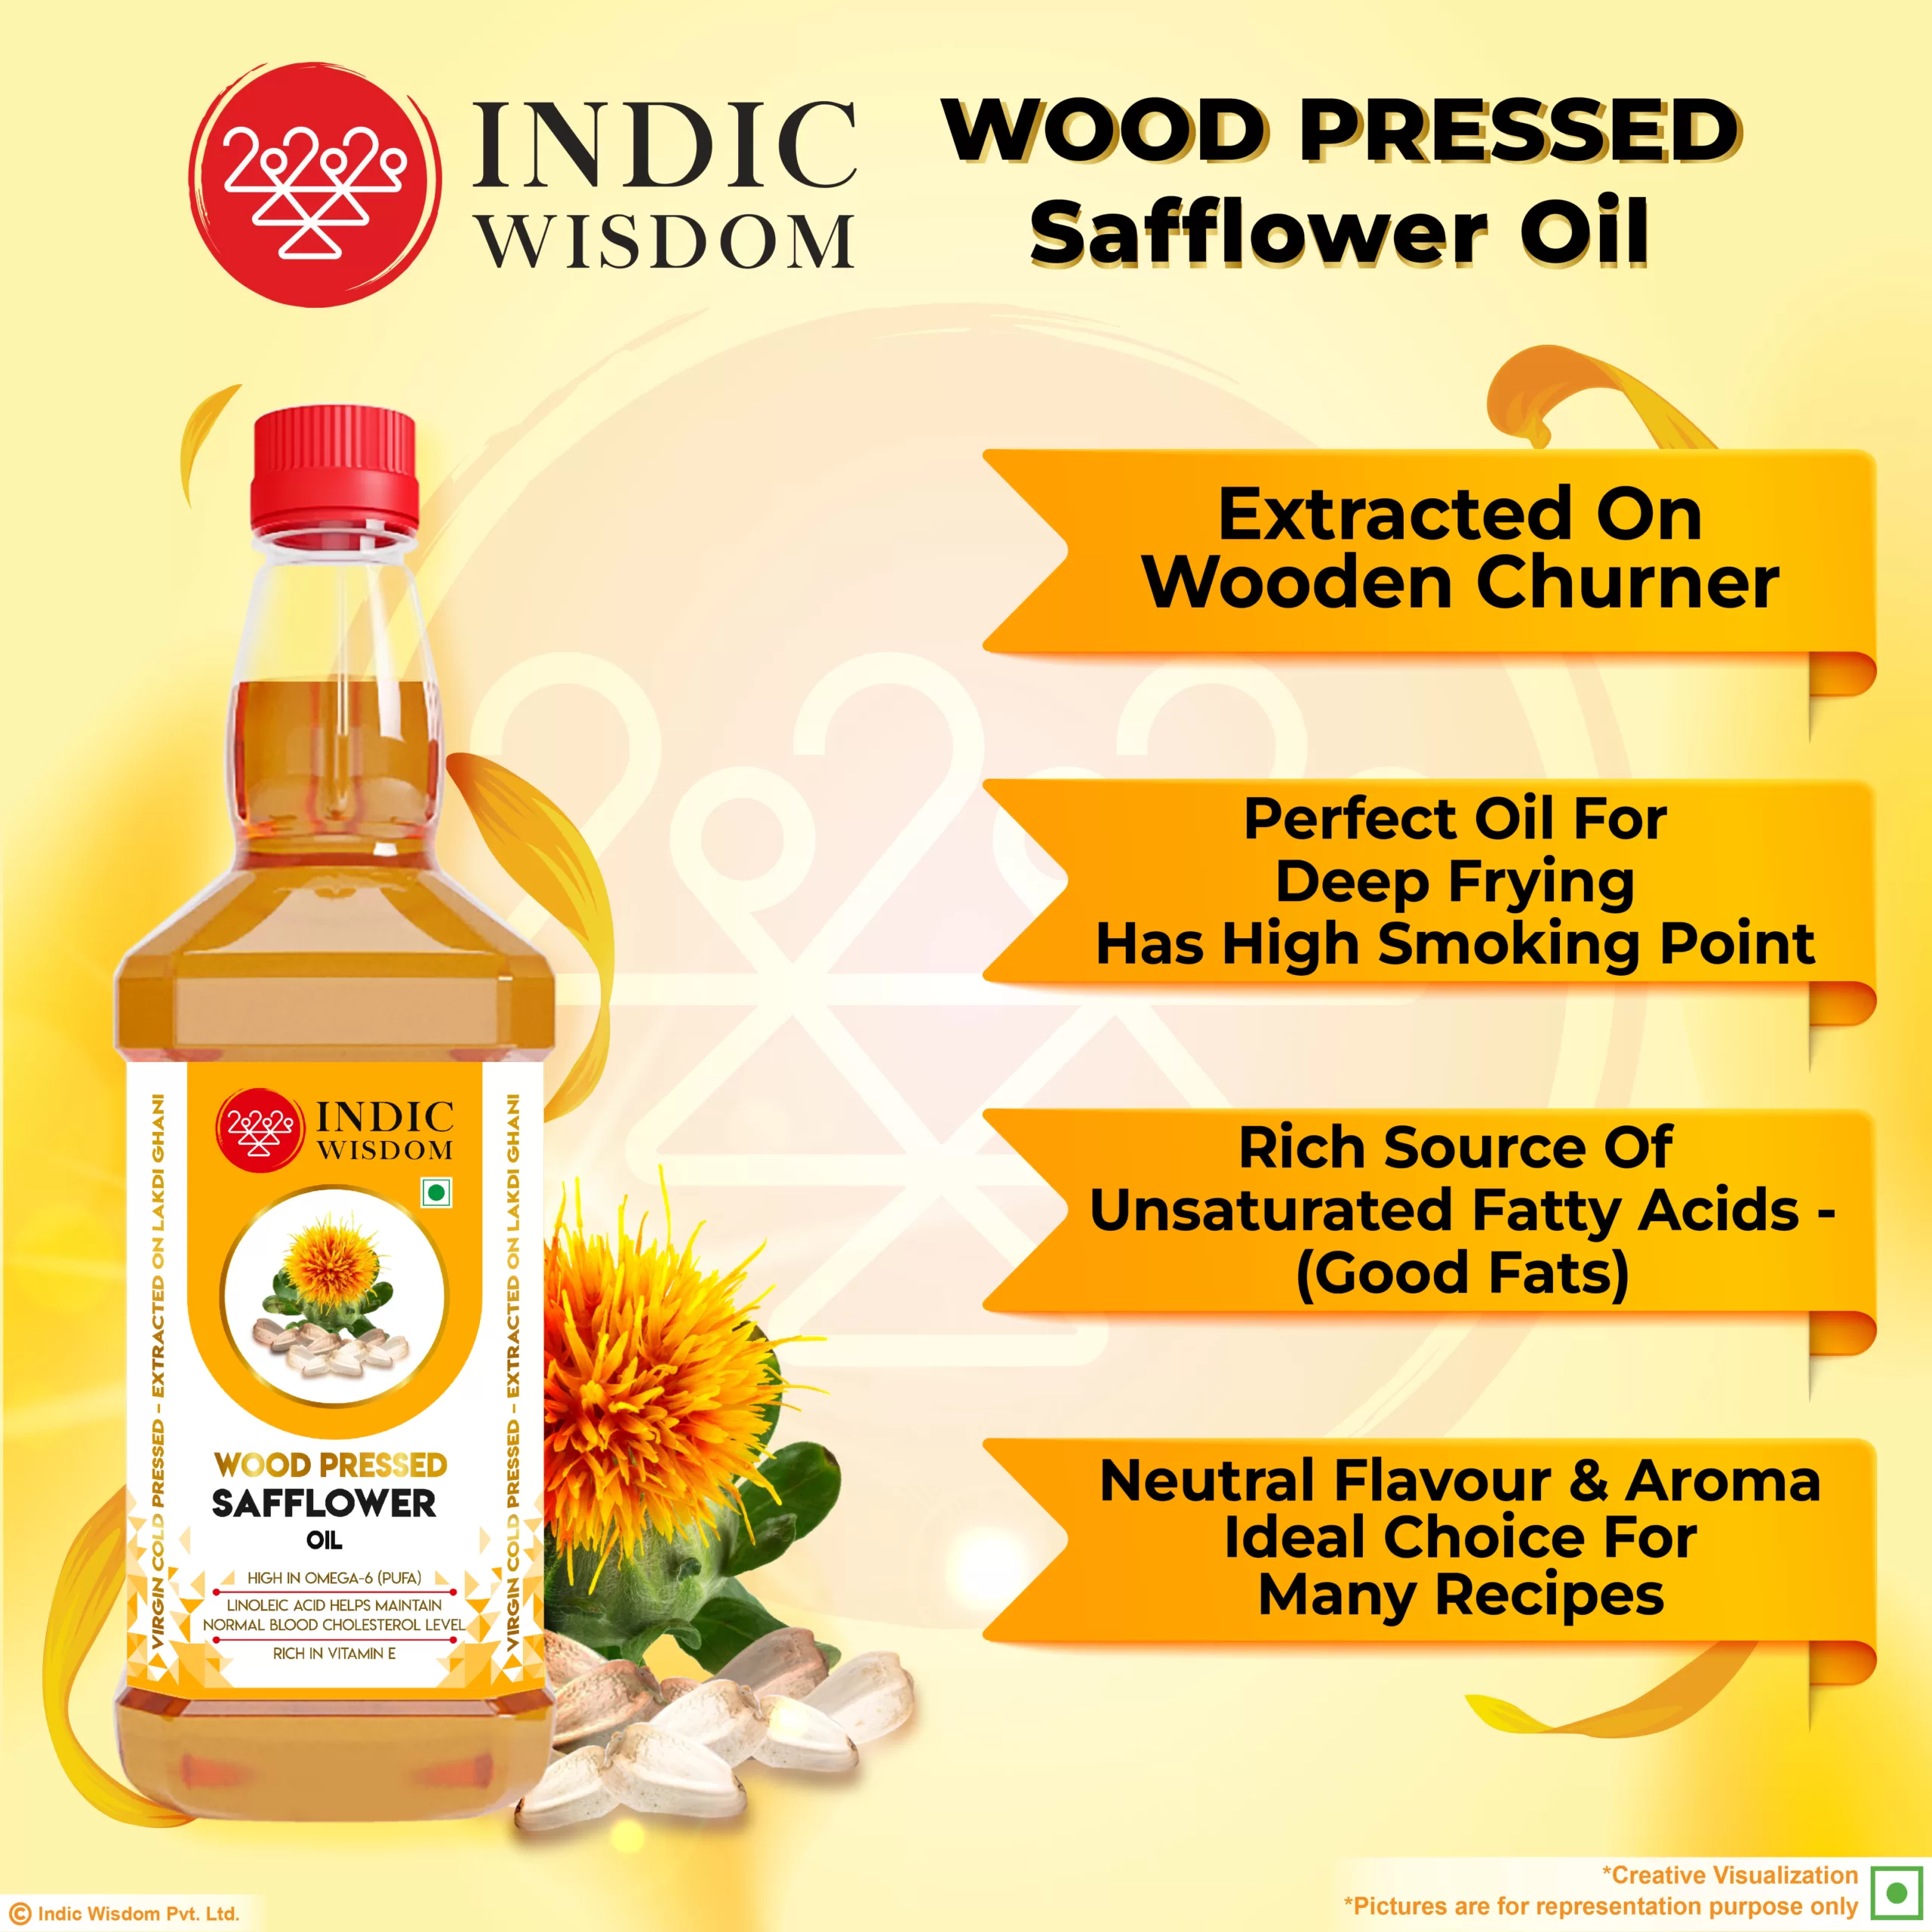 Why buy wood pressed safflower oil